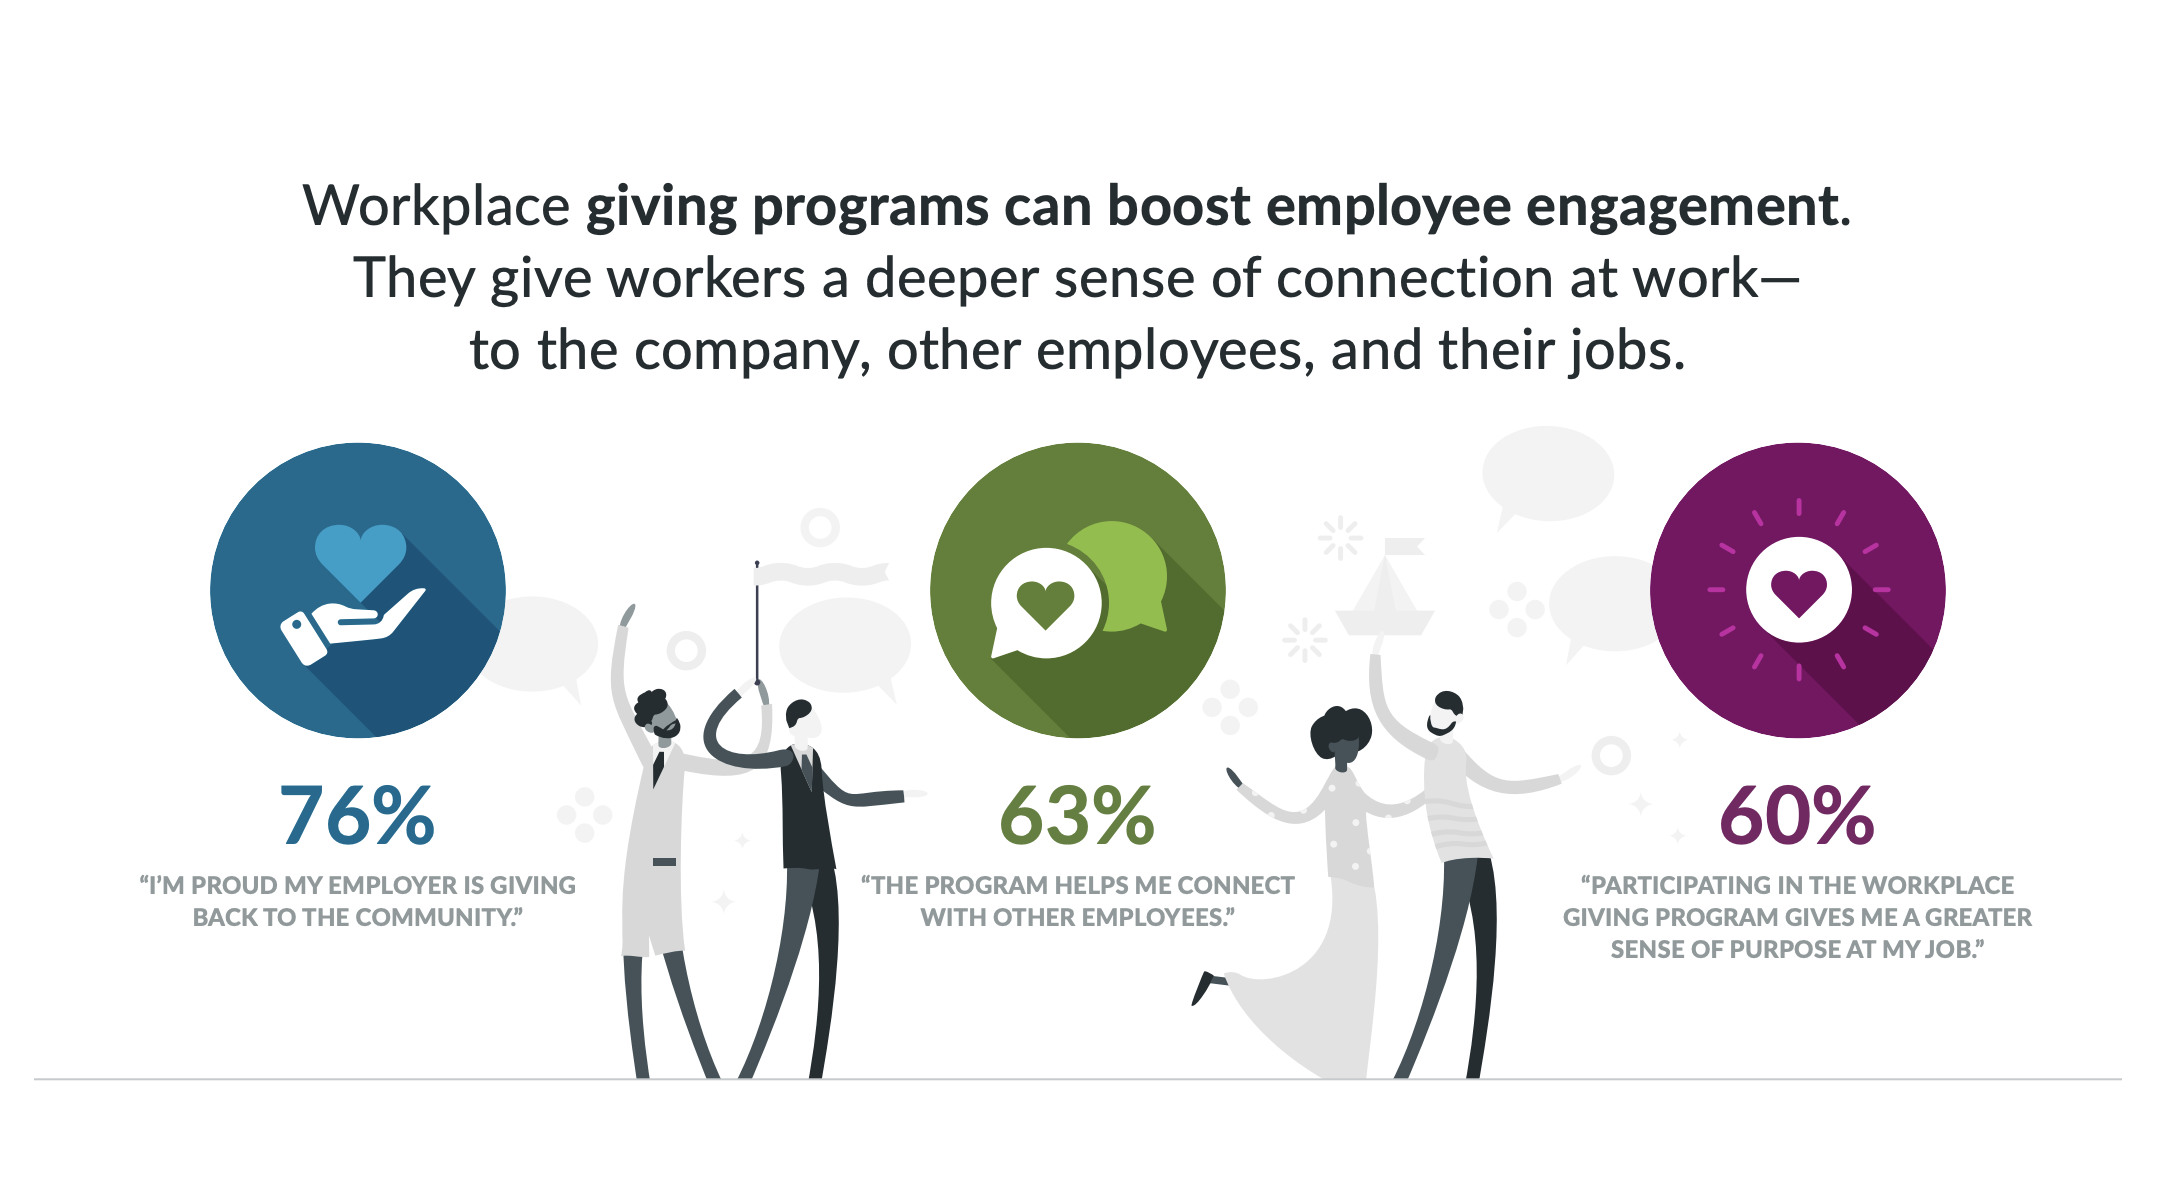 Workplace giving programs can boost employee engagement. They give workers a deeper sense of connection at work— to the company, other employees, and their jobs.